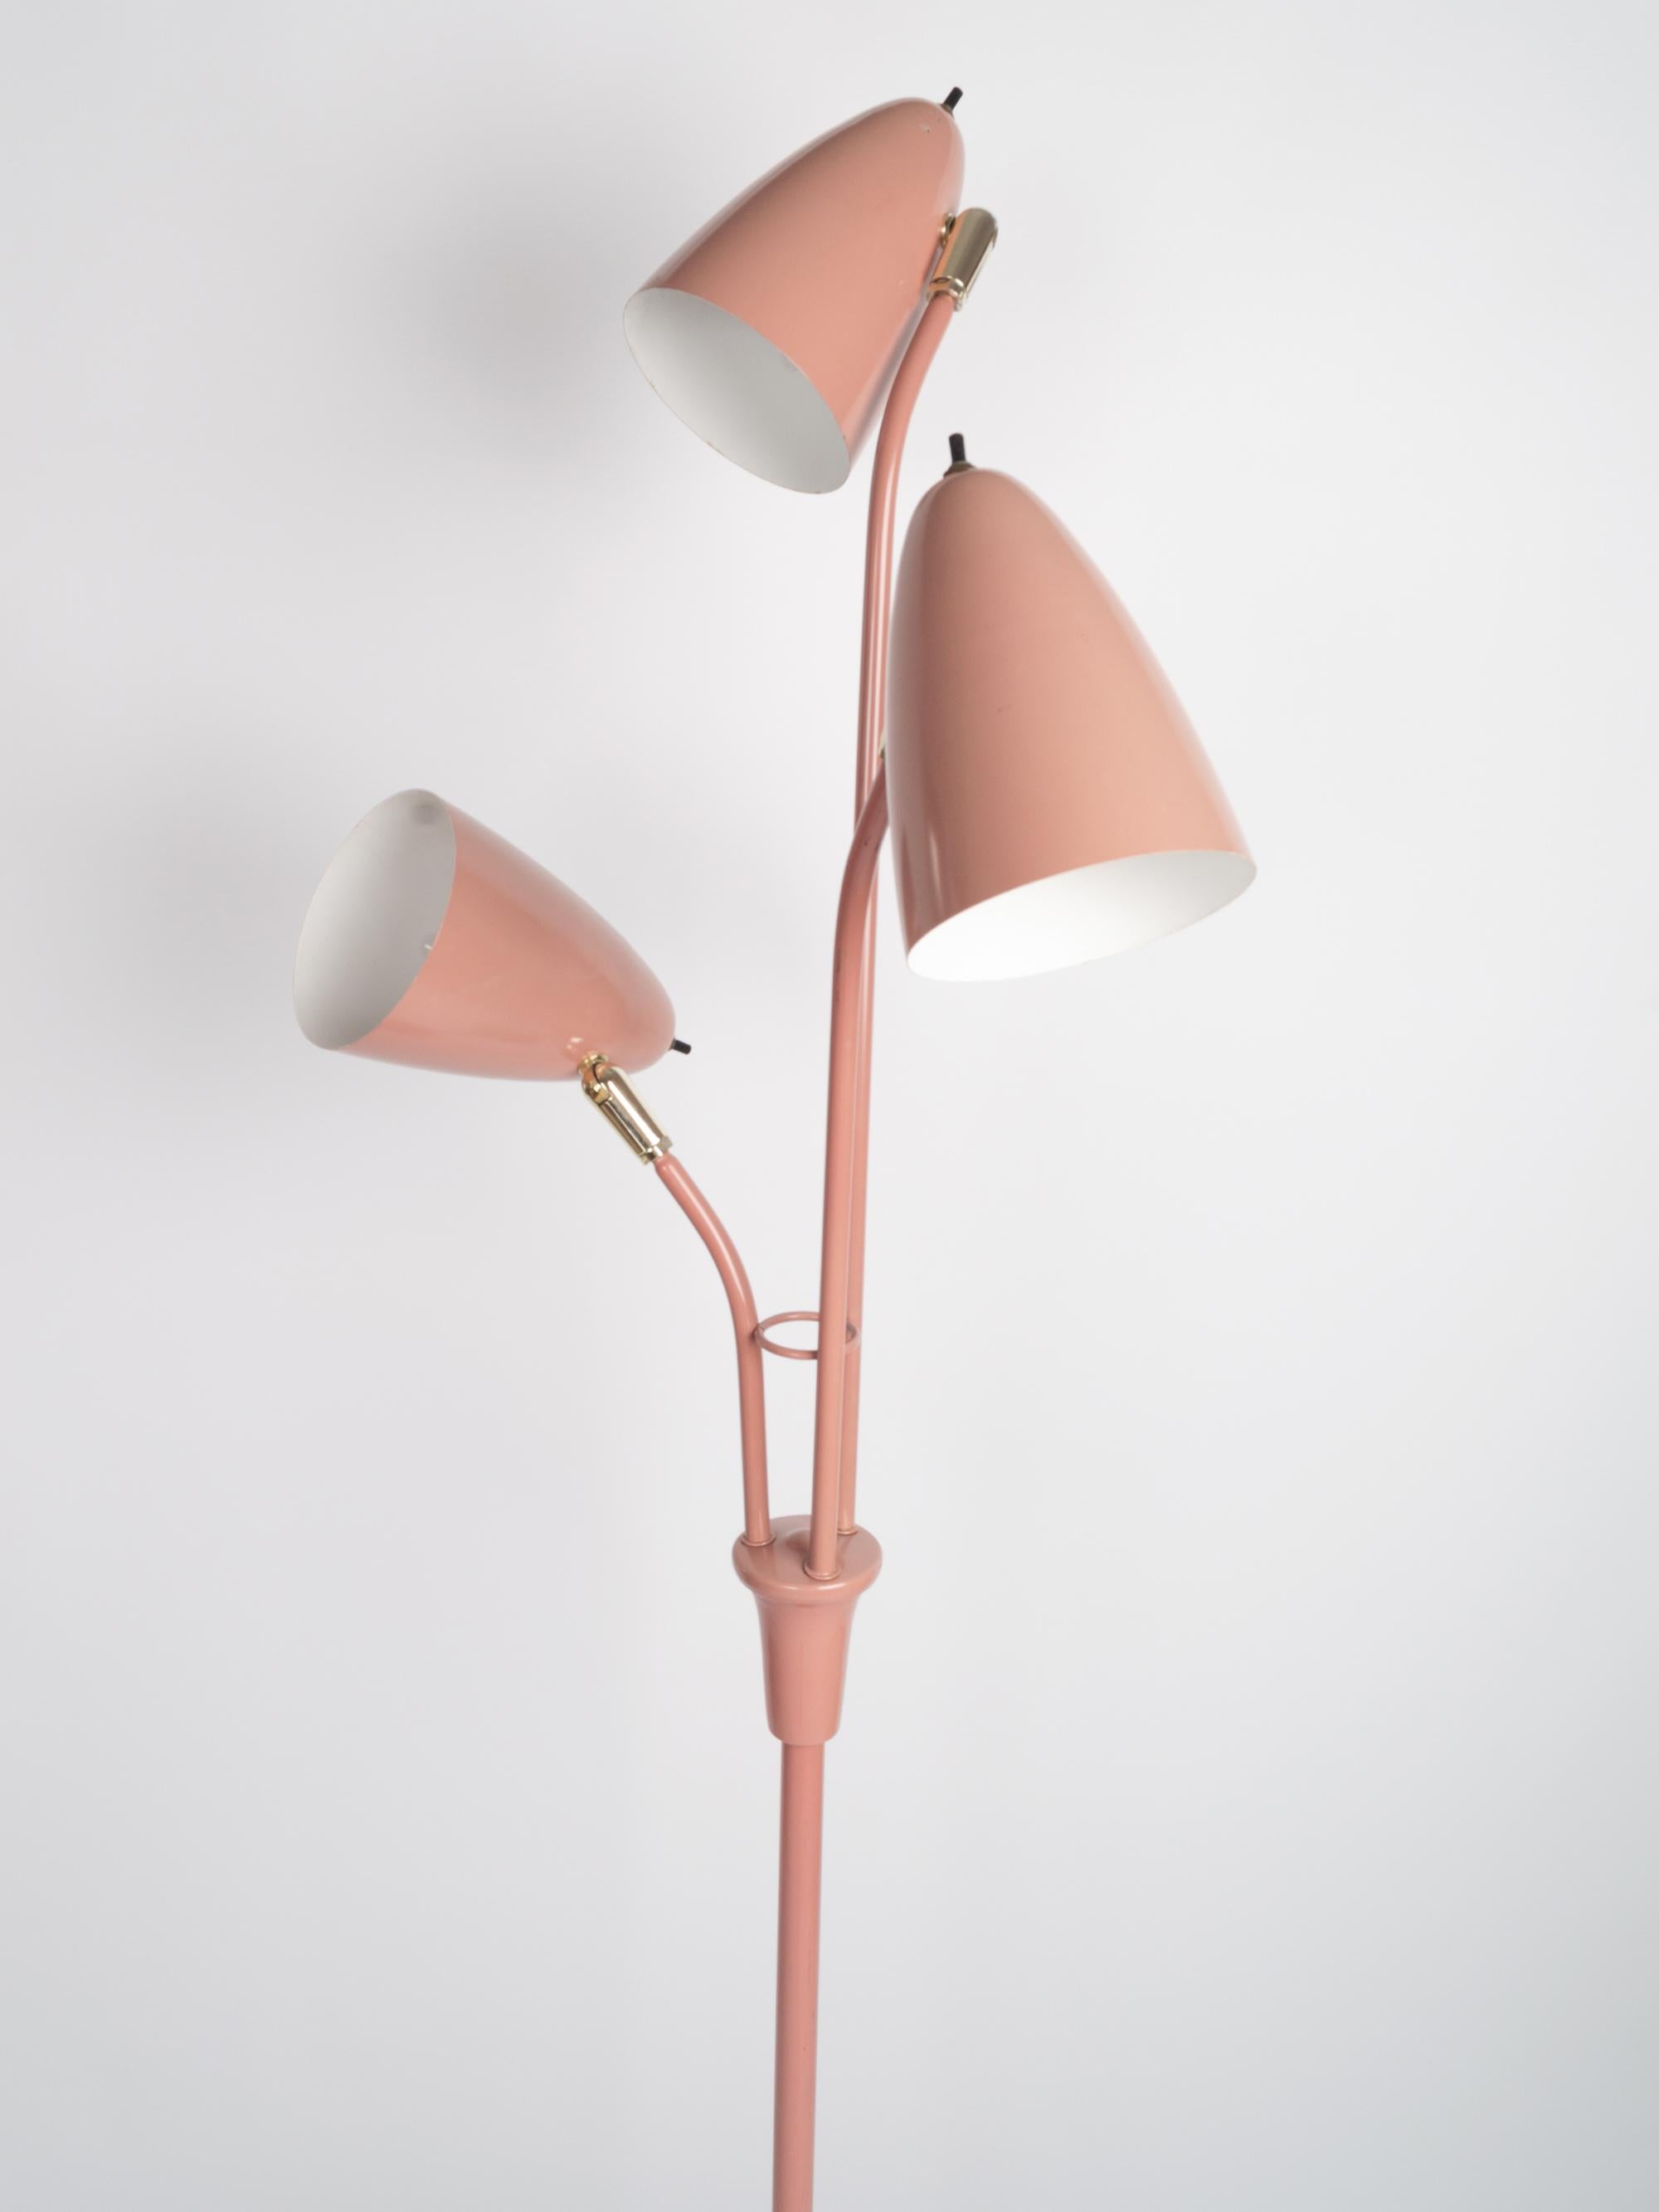 Gerald Thurston Triennale floor lamp for Lightolier. Original dusky pink enameled frame and base with brass detailing.
In good vintage condition showing expected signs of wear commensurate of age.